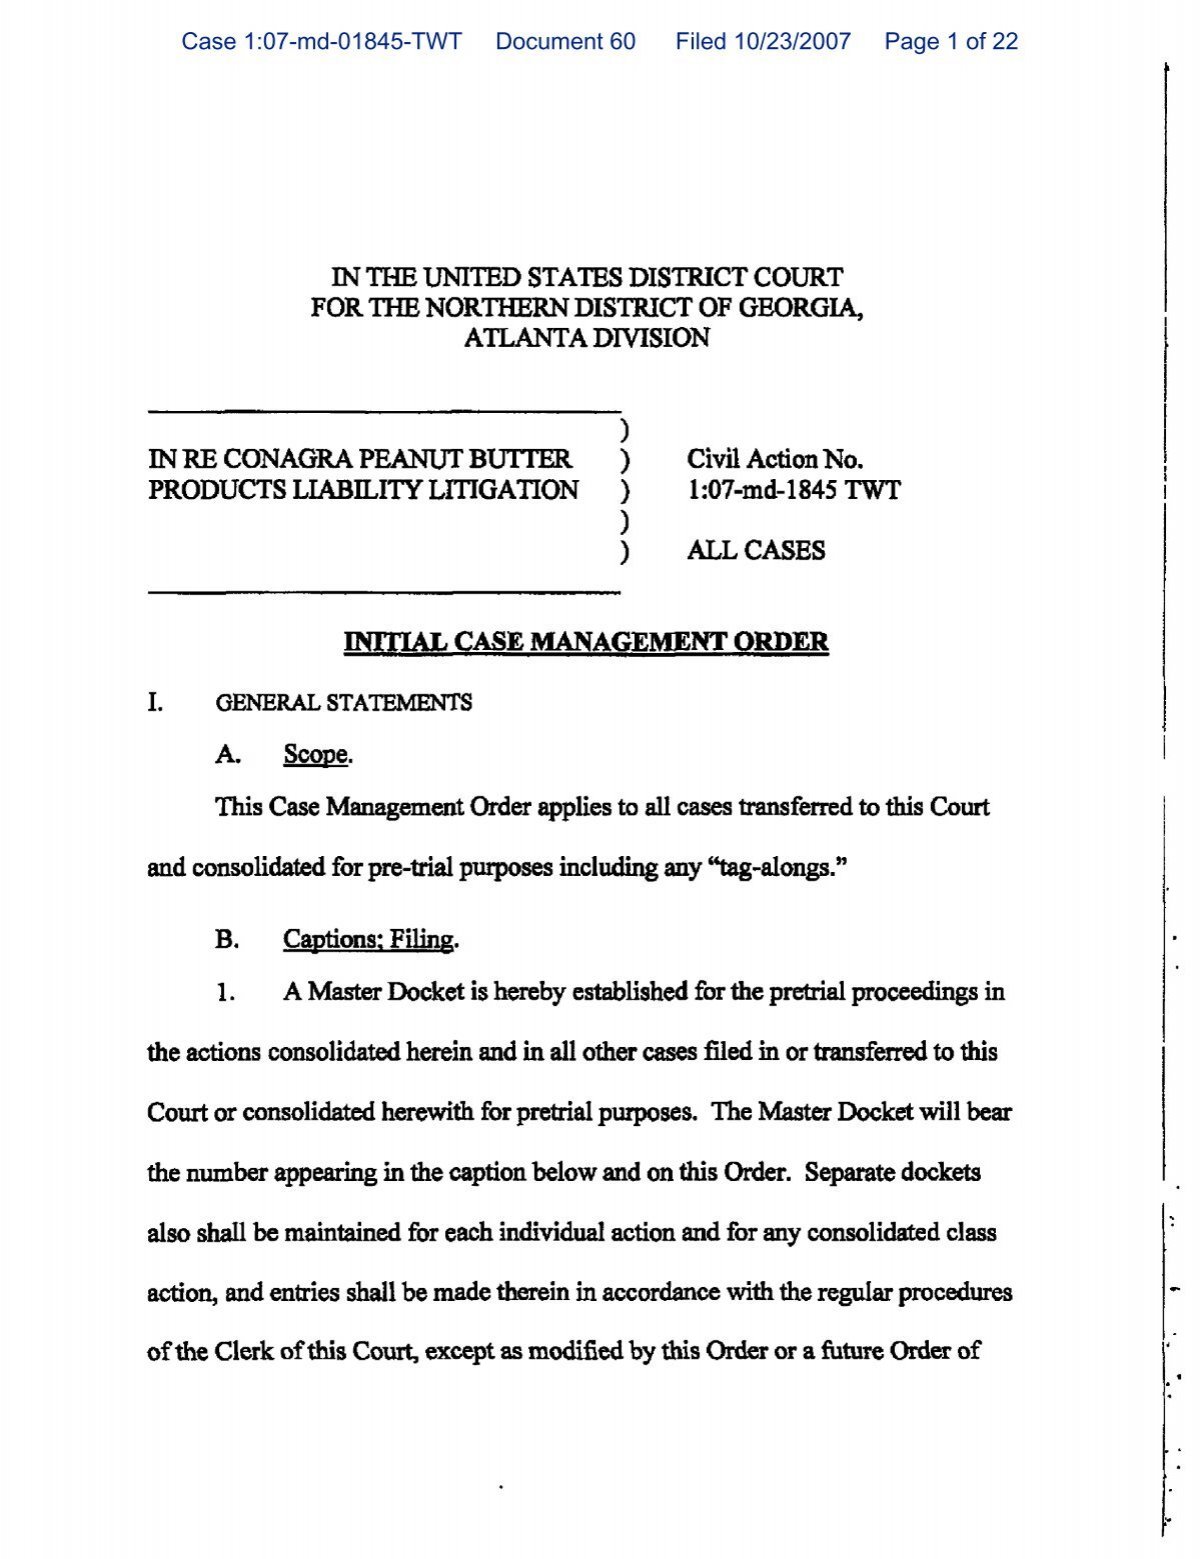 Initial Case Management Order Northern District of Georgia